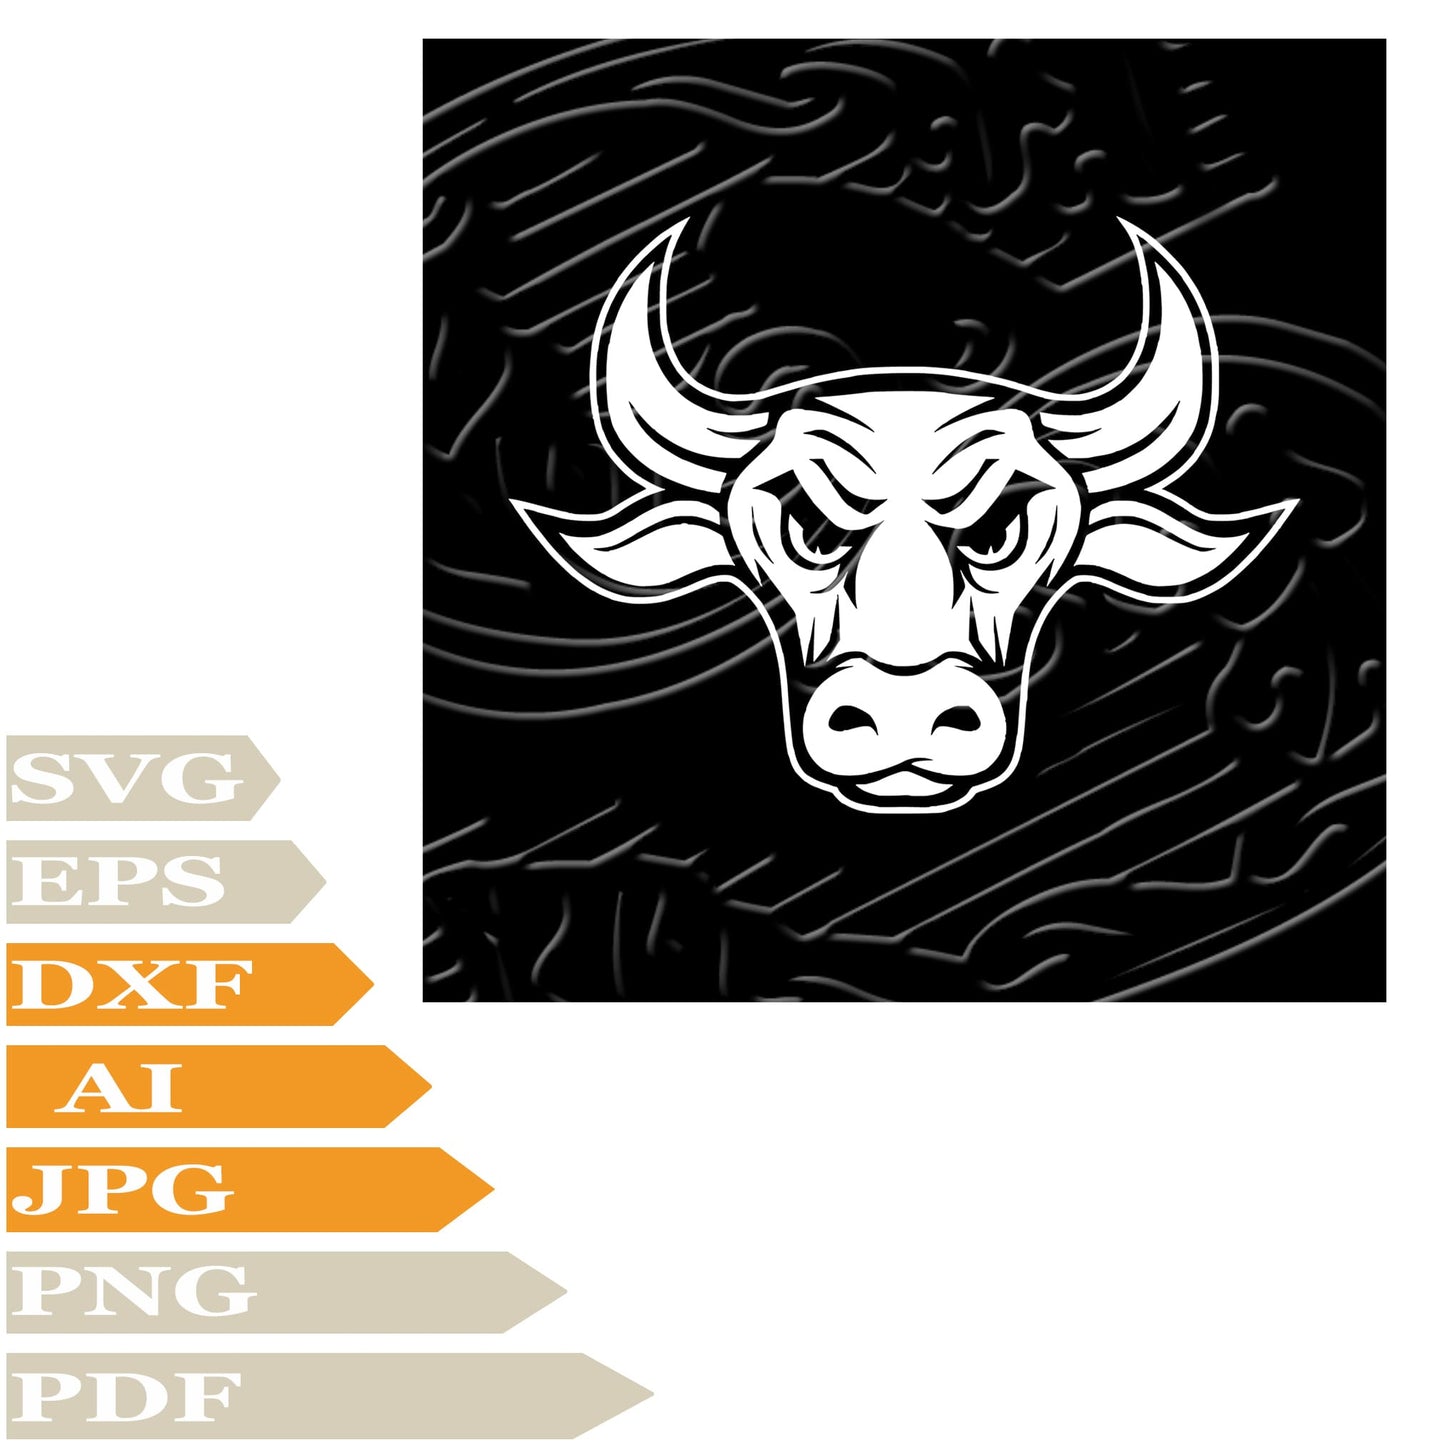 Bull, Wild Bull Svg File, Image Cut, Png, For Tattoo, Silhouette, Digital Vector Download, Cut File, Clipart, For Cricut